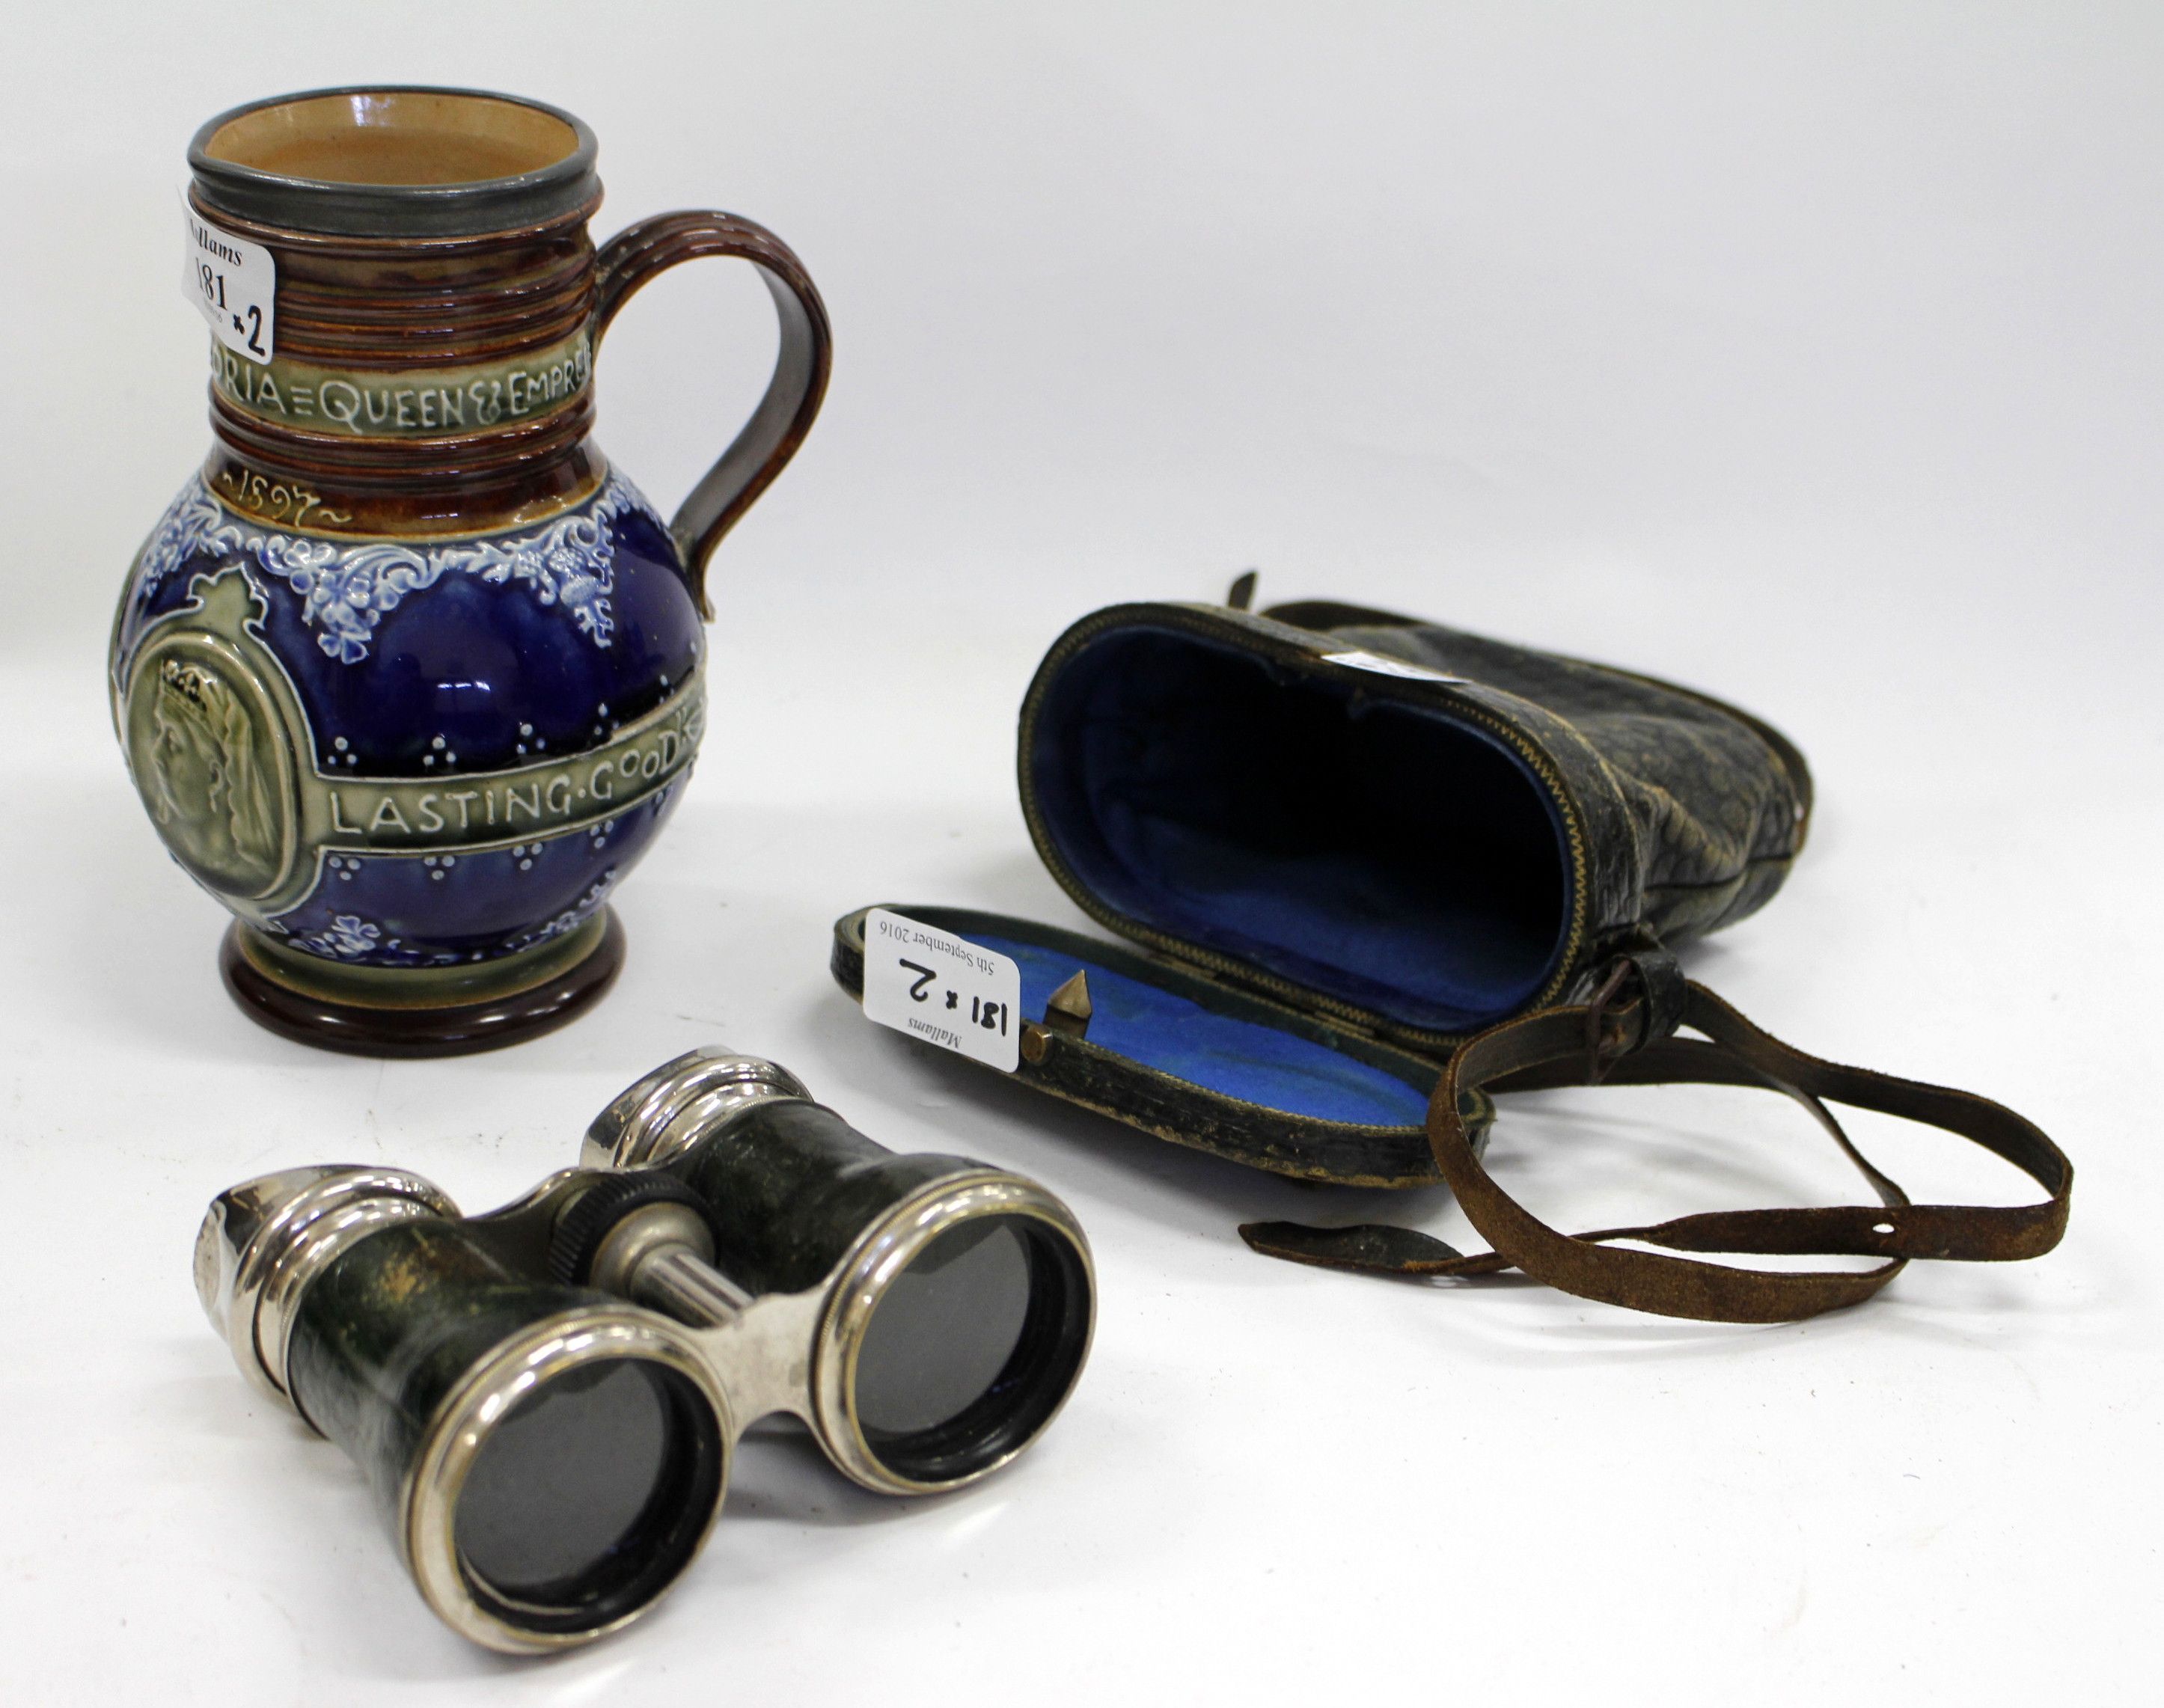 A VICTORIAN ROYAL DOULTON LAMBETH QUEEN VICTORIAN JUG 17cm high and a set of opera glasses in a